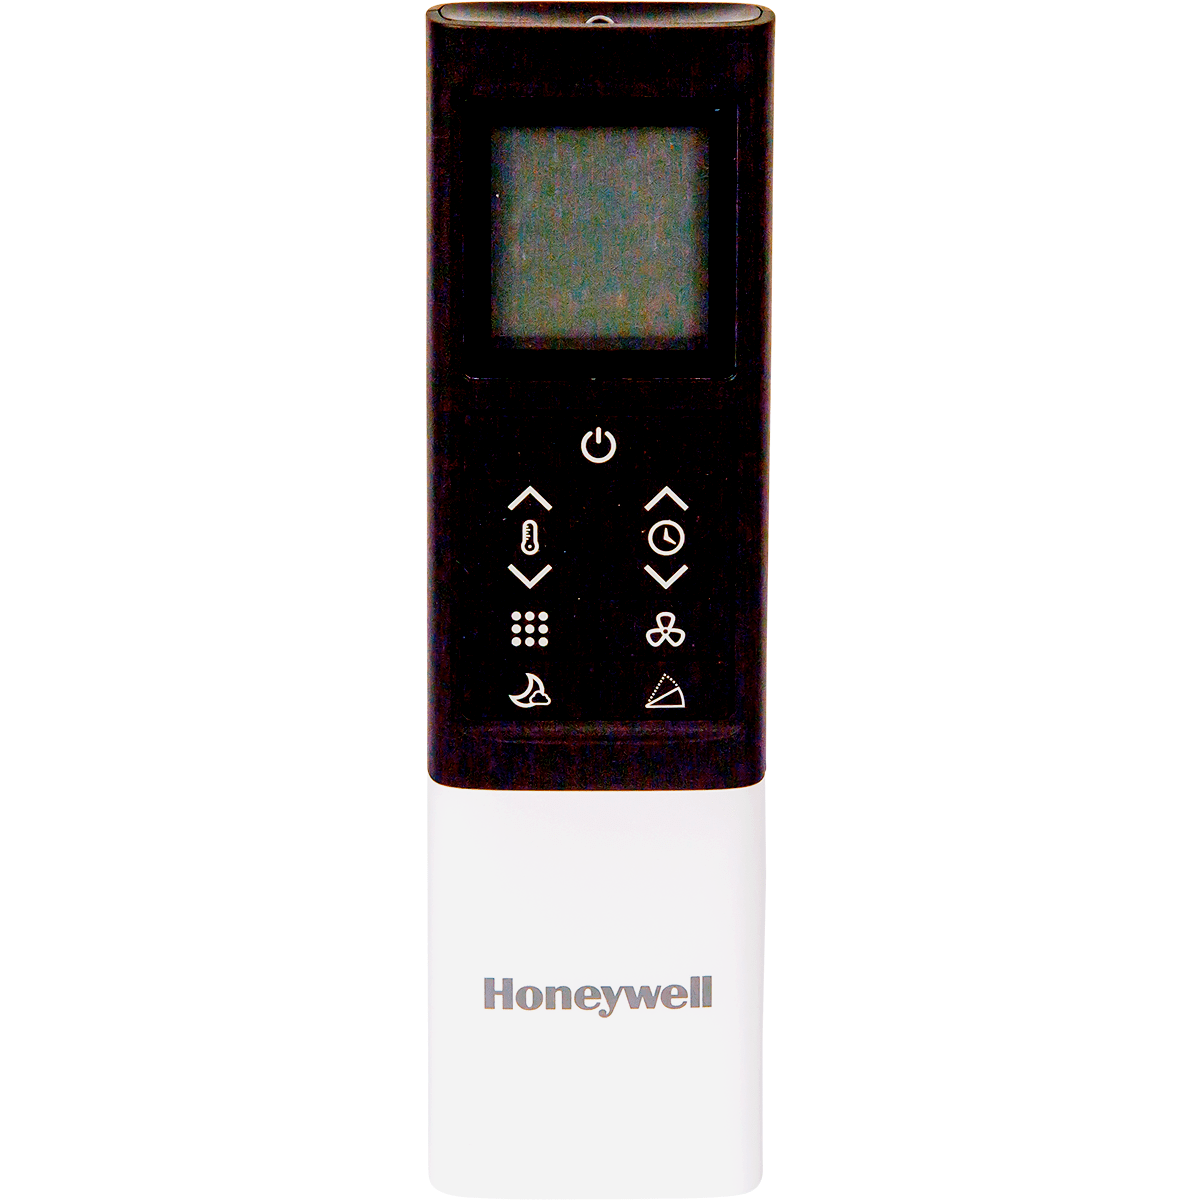 Honeywell Remote Control for HL& HF Portable Air Conditioners (11222001000861)